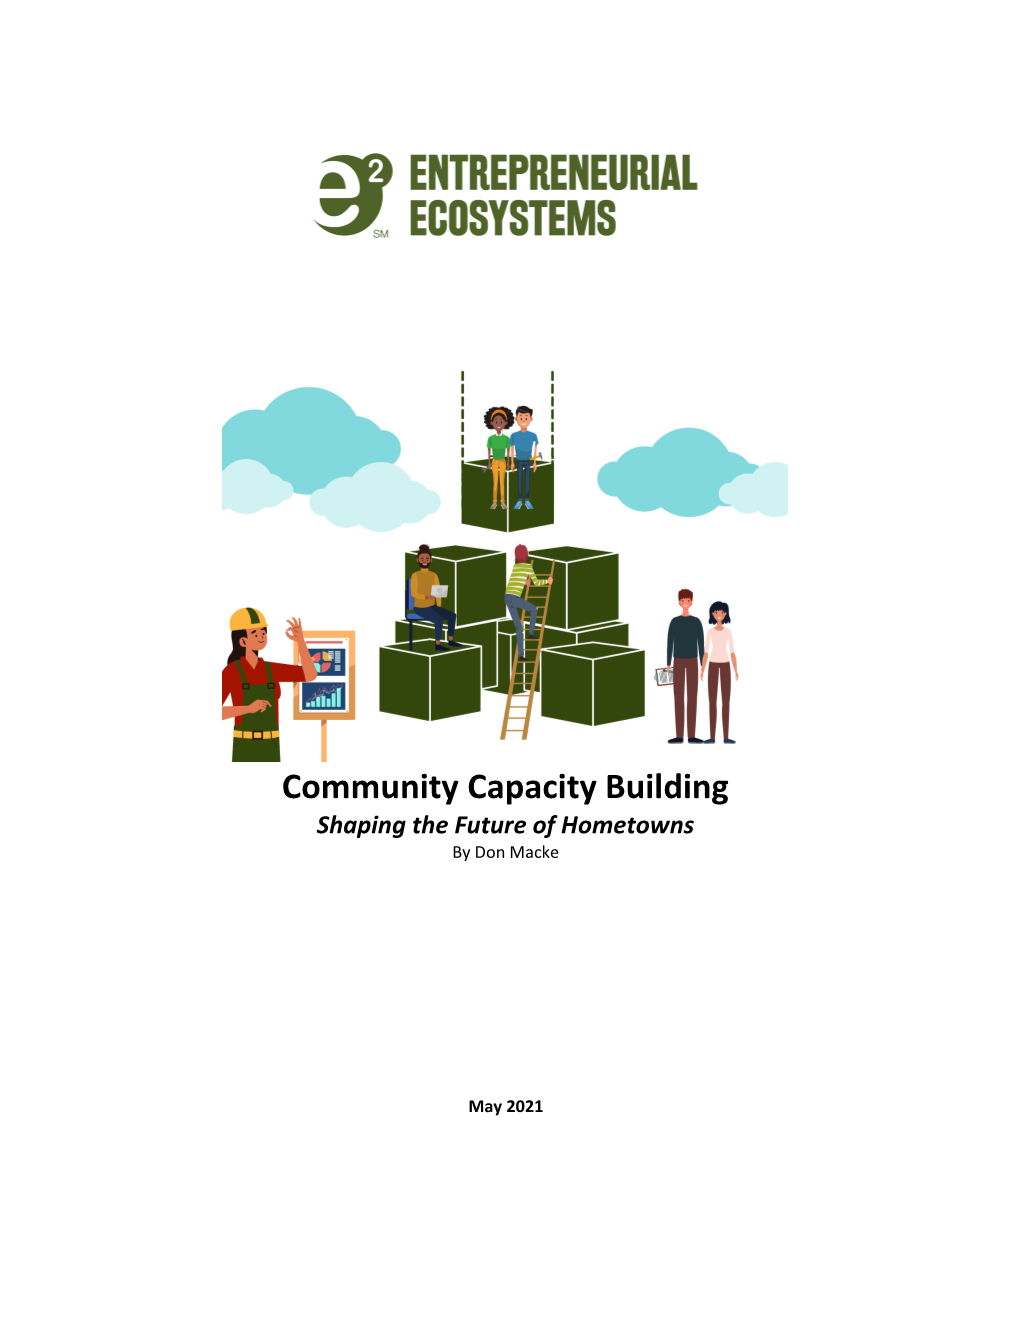 Community Capacity Building Shaping the Future of Hometowns by Don Macke